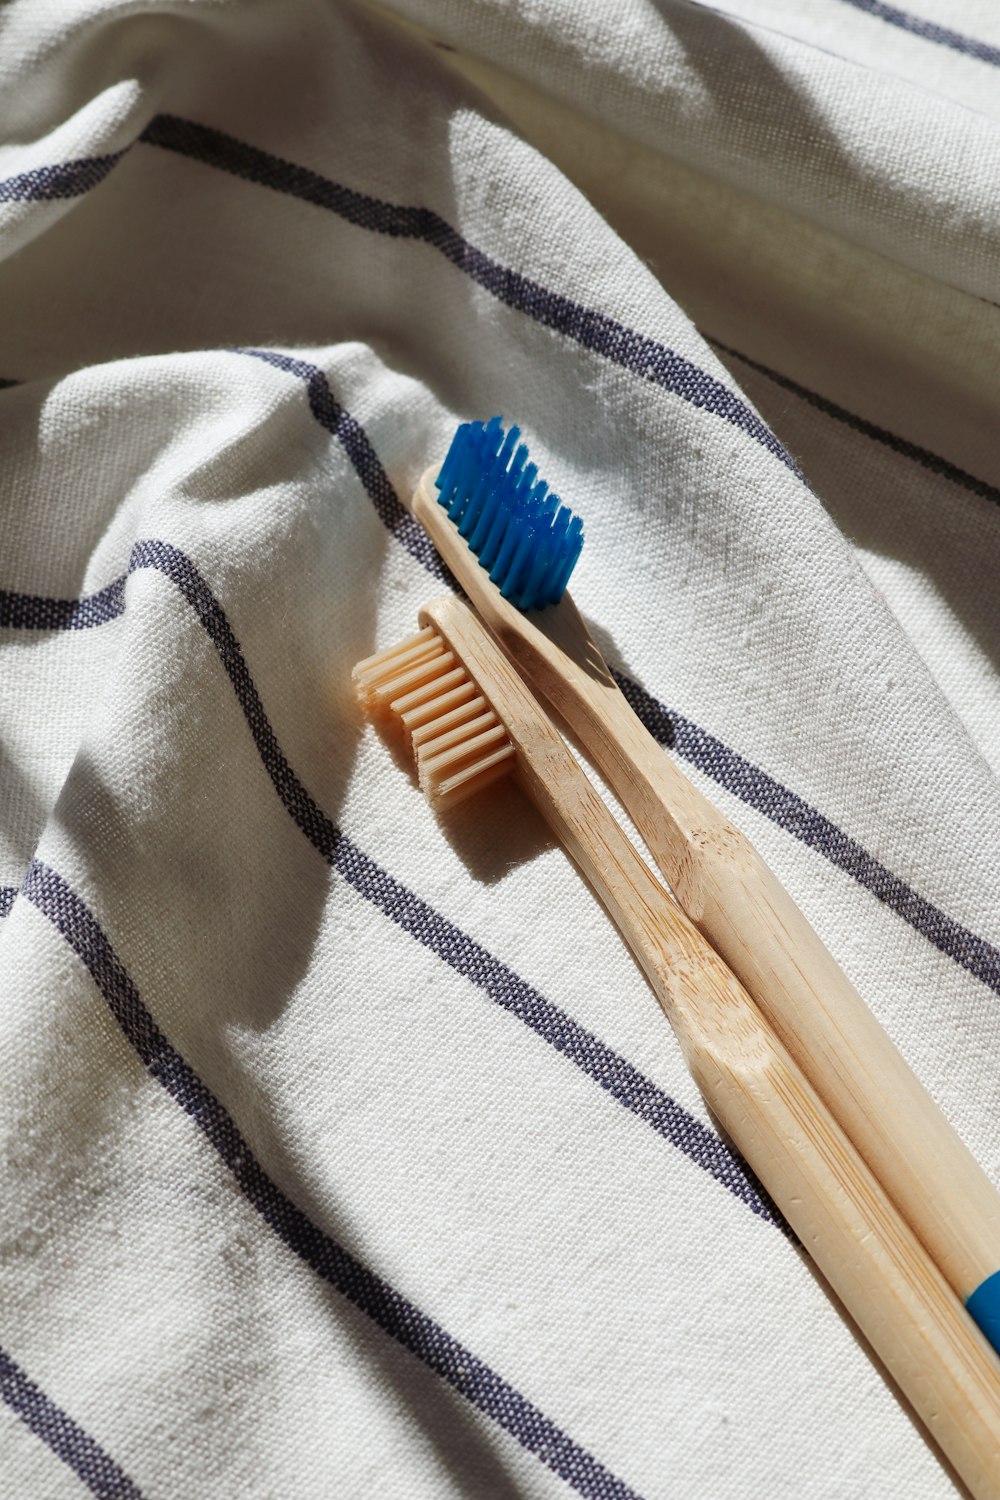 blue and brown wooden toothbrushes - how to get rid of ingrown hair on neck